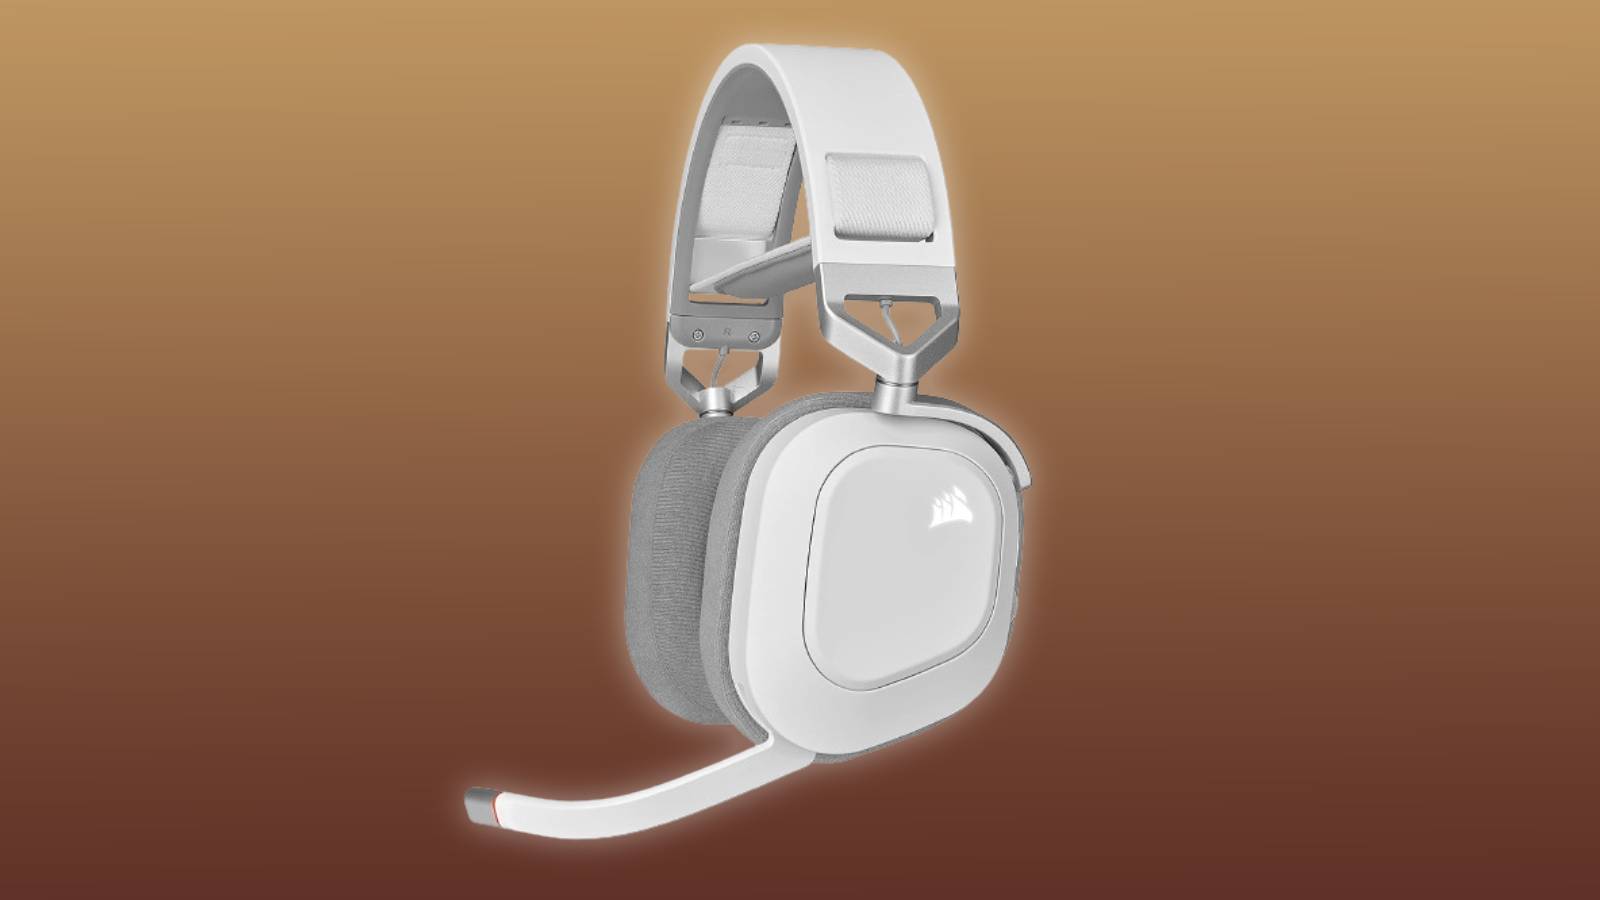 Image of the CORSAIR HS80 RGB WIRELESS Multiplatform Gaming Headset on a yellow and brown background.